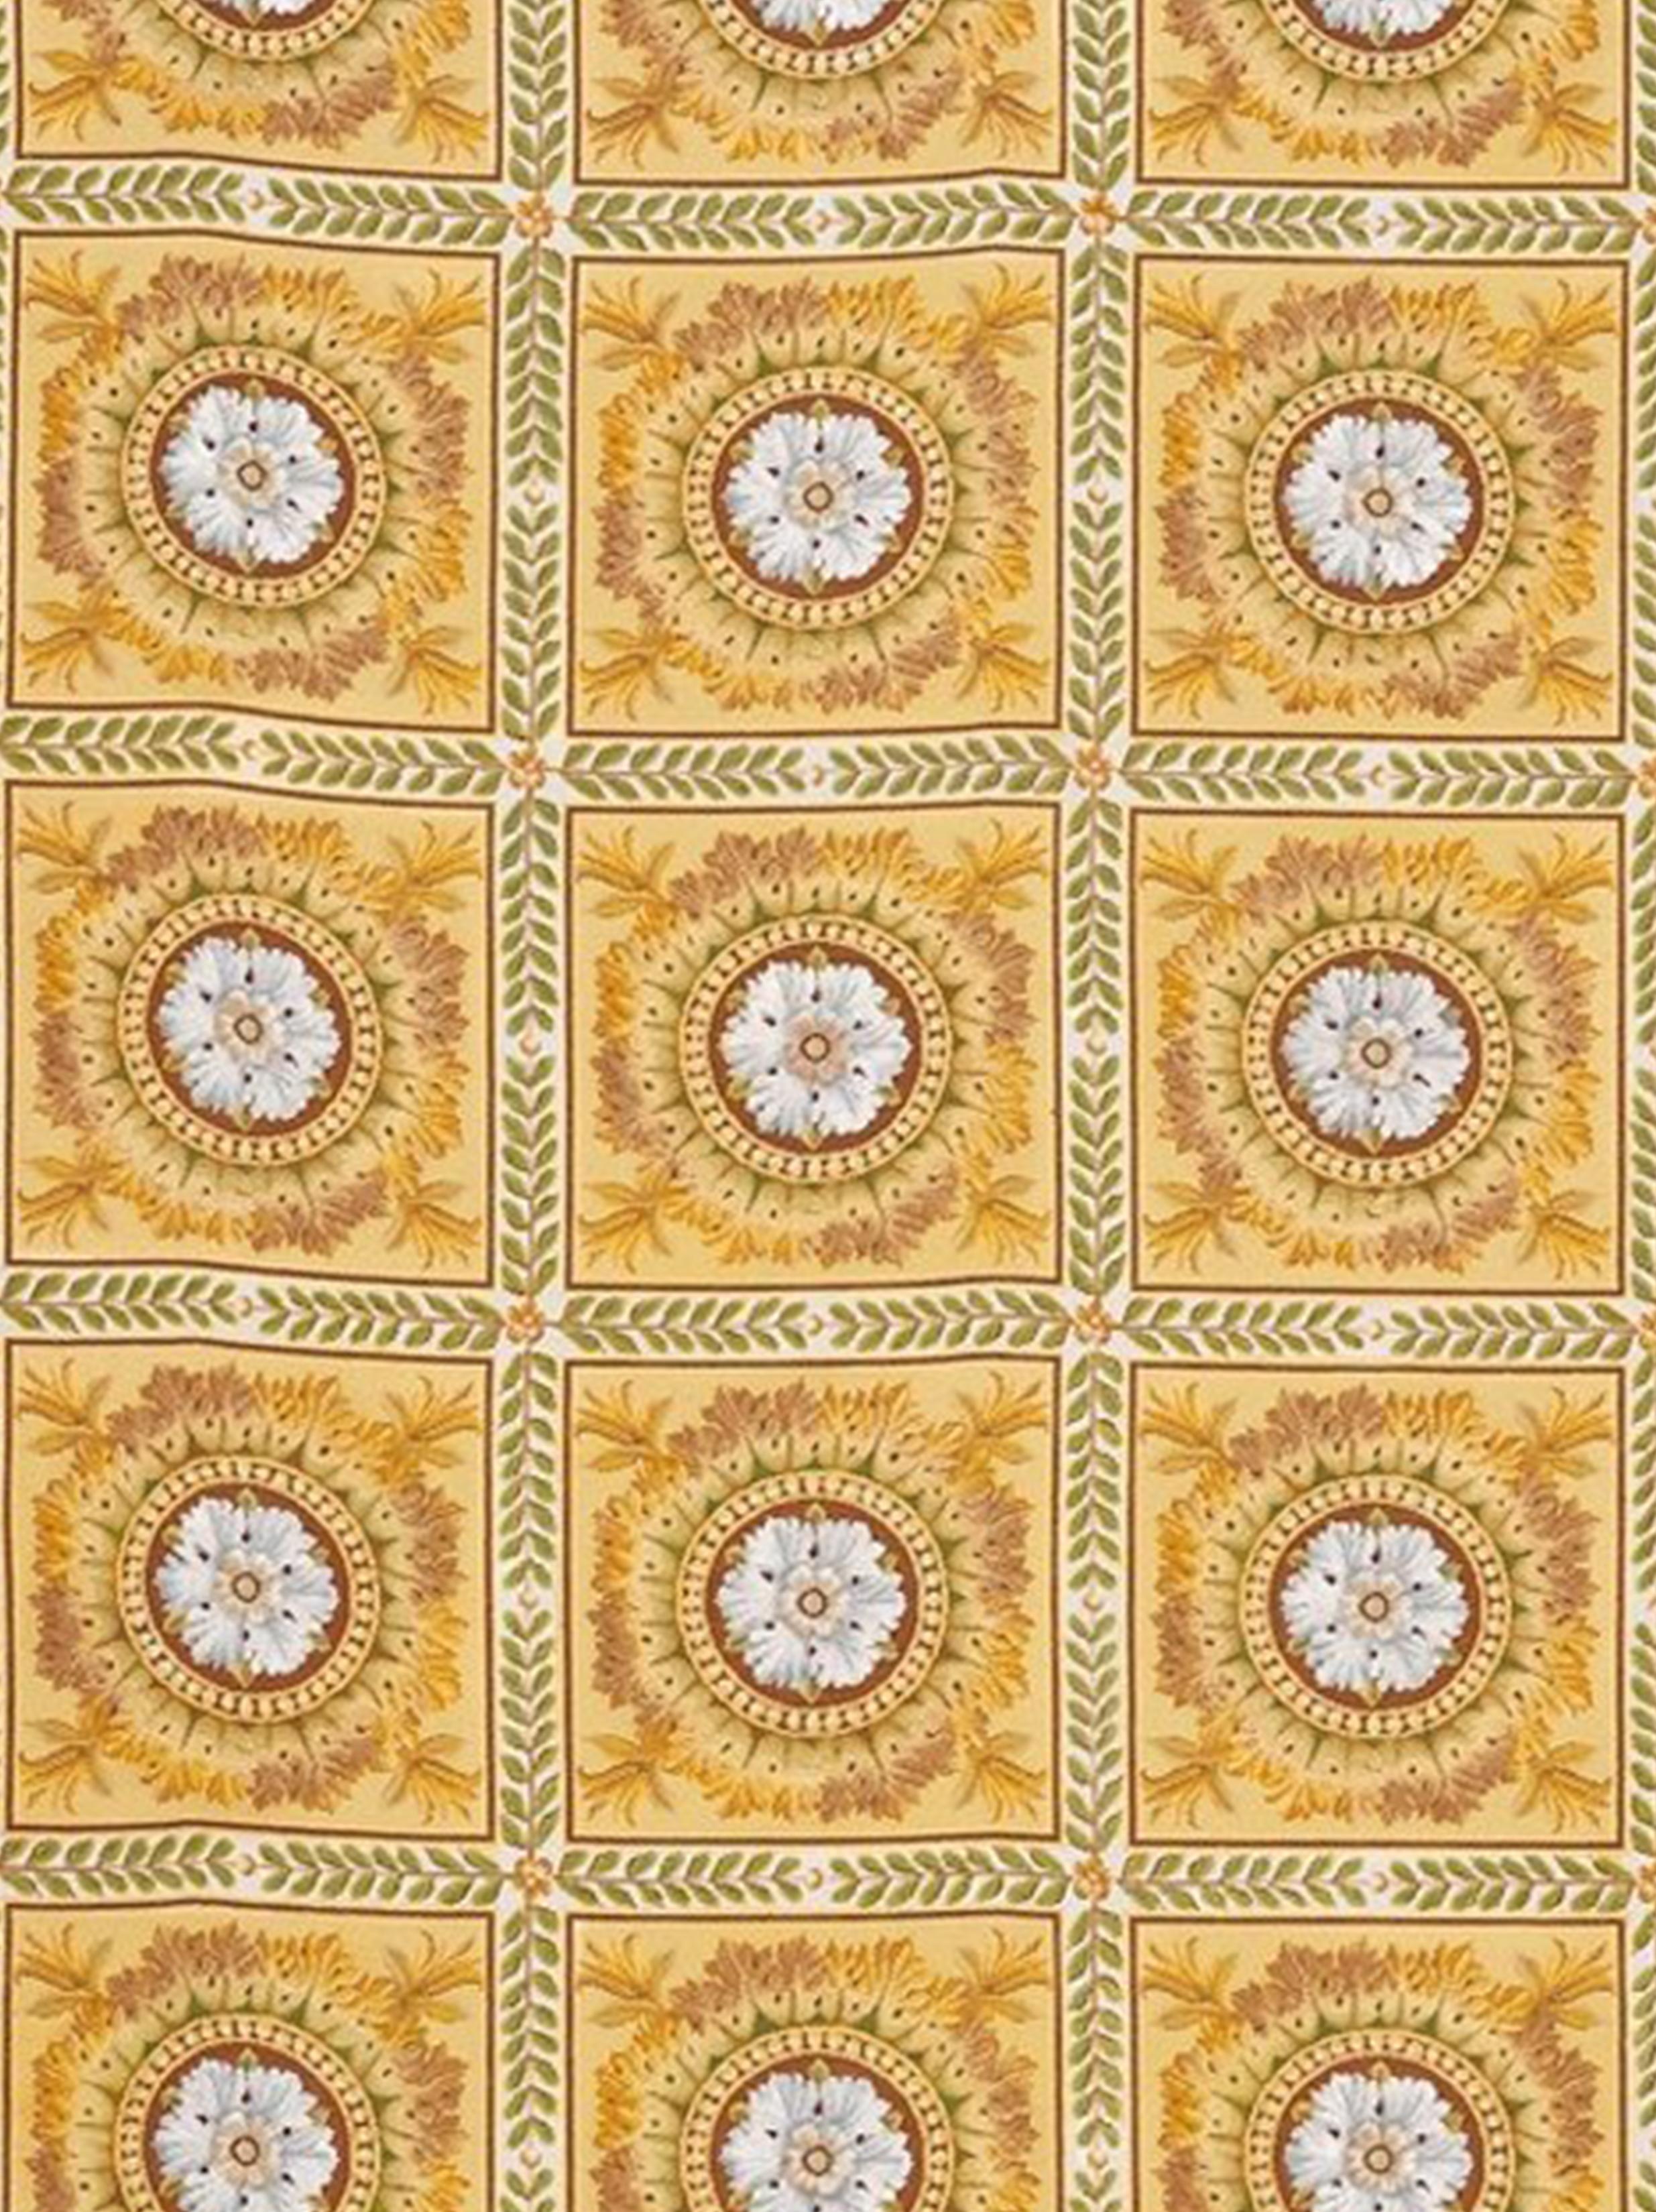 Inspired by the rugs of the French Empire period, a circular arrangement of leaves in green, russet and gold surround white, pale blue and beige rosettes on a warm yellow and gold background within a sienna red border. Made with fine quality wool